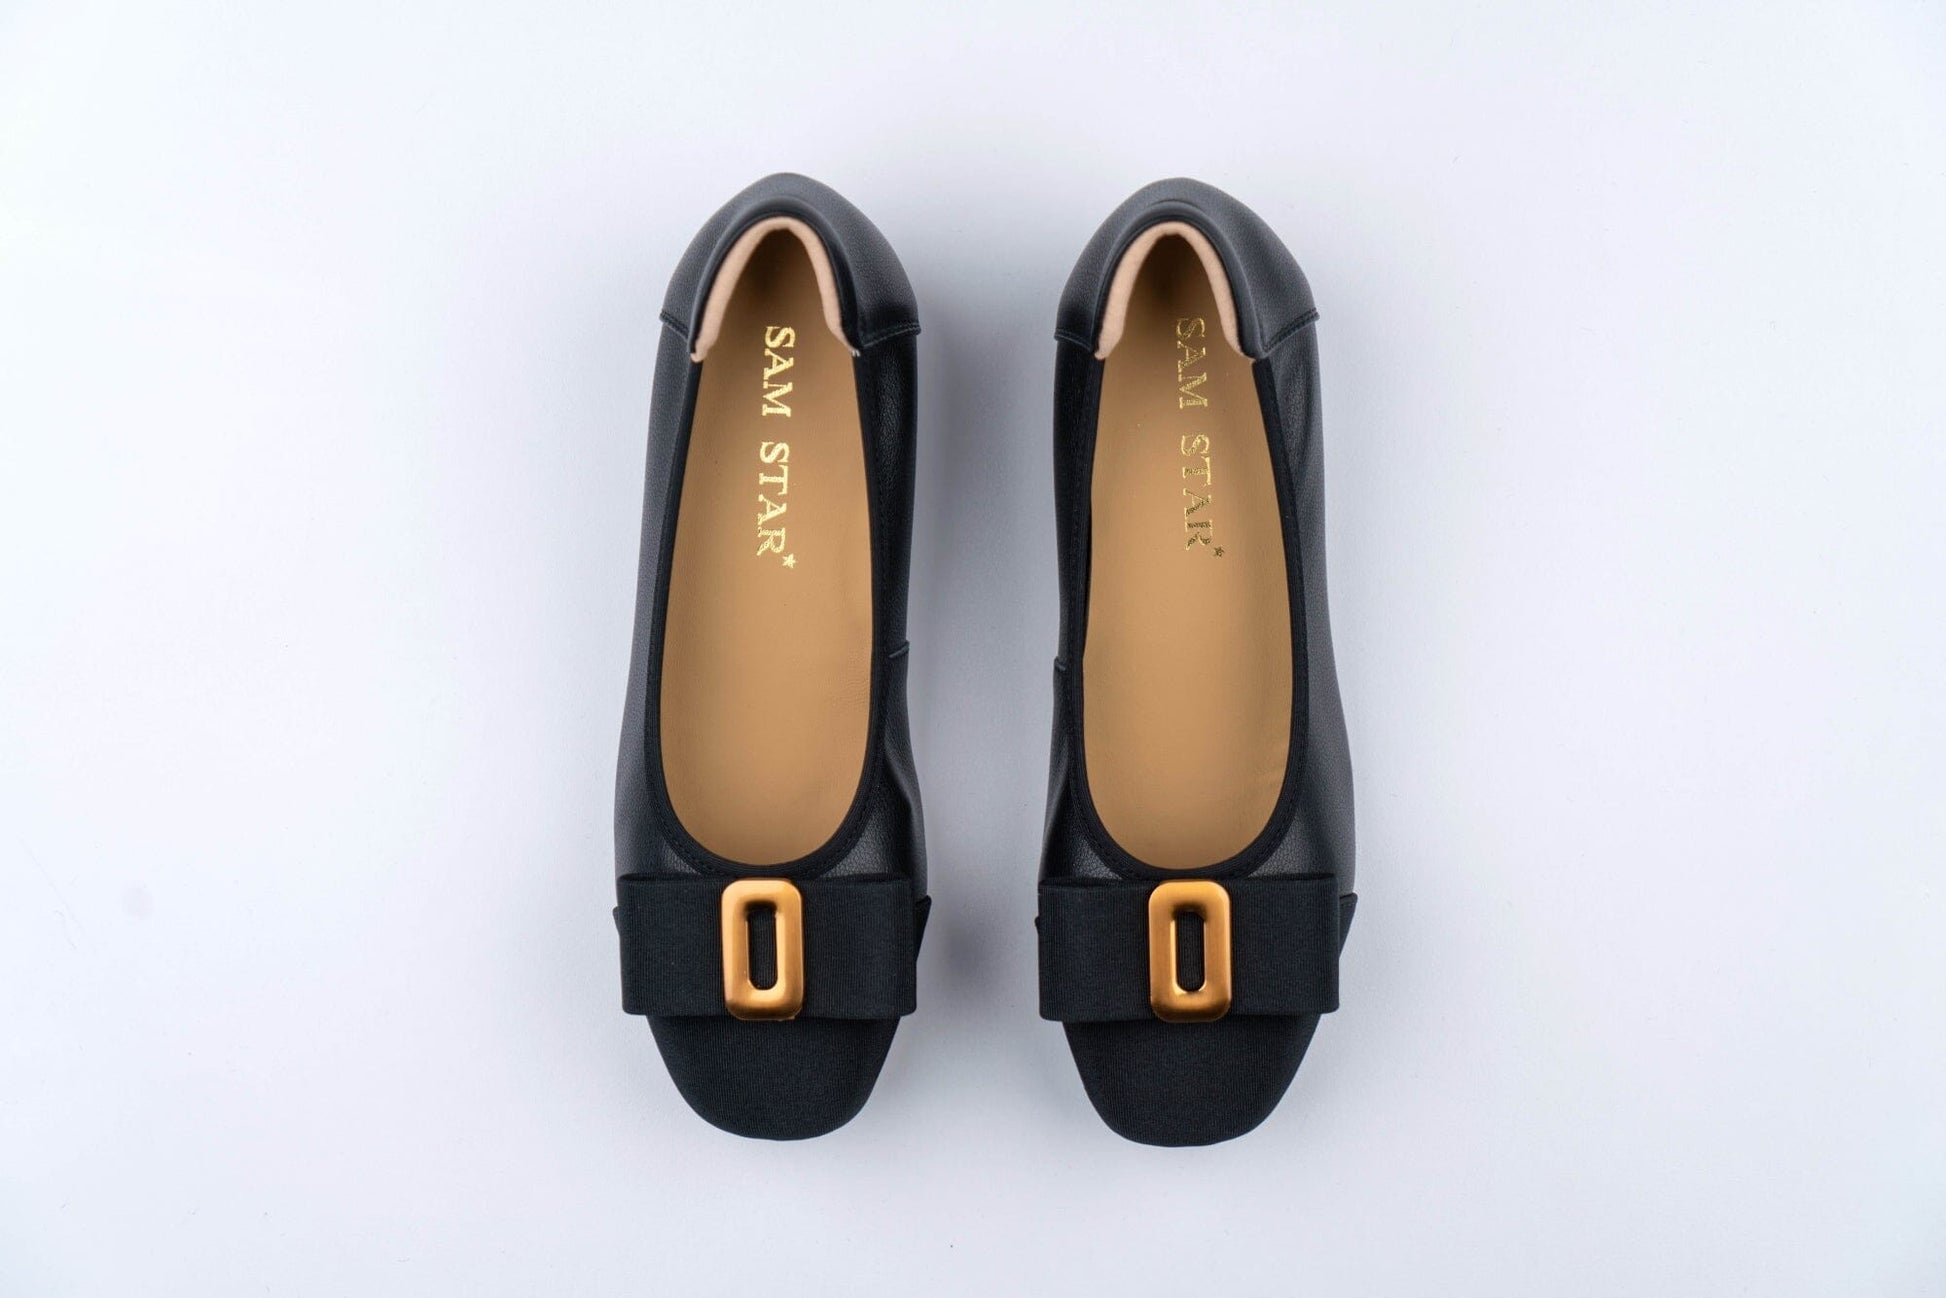 SS23002 Leather pumps with bow& gold buckle block heel ( new arrival ) Pumps Sam Star shoes Black 37/4 